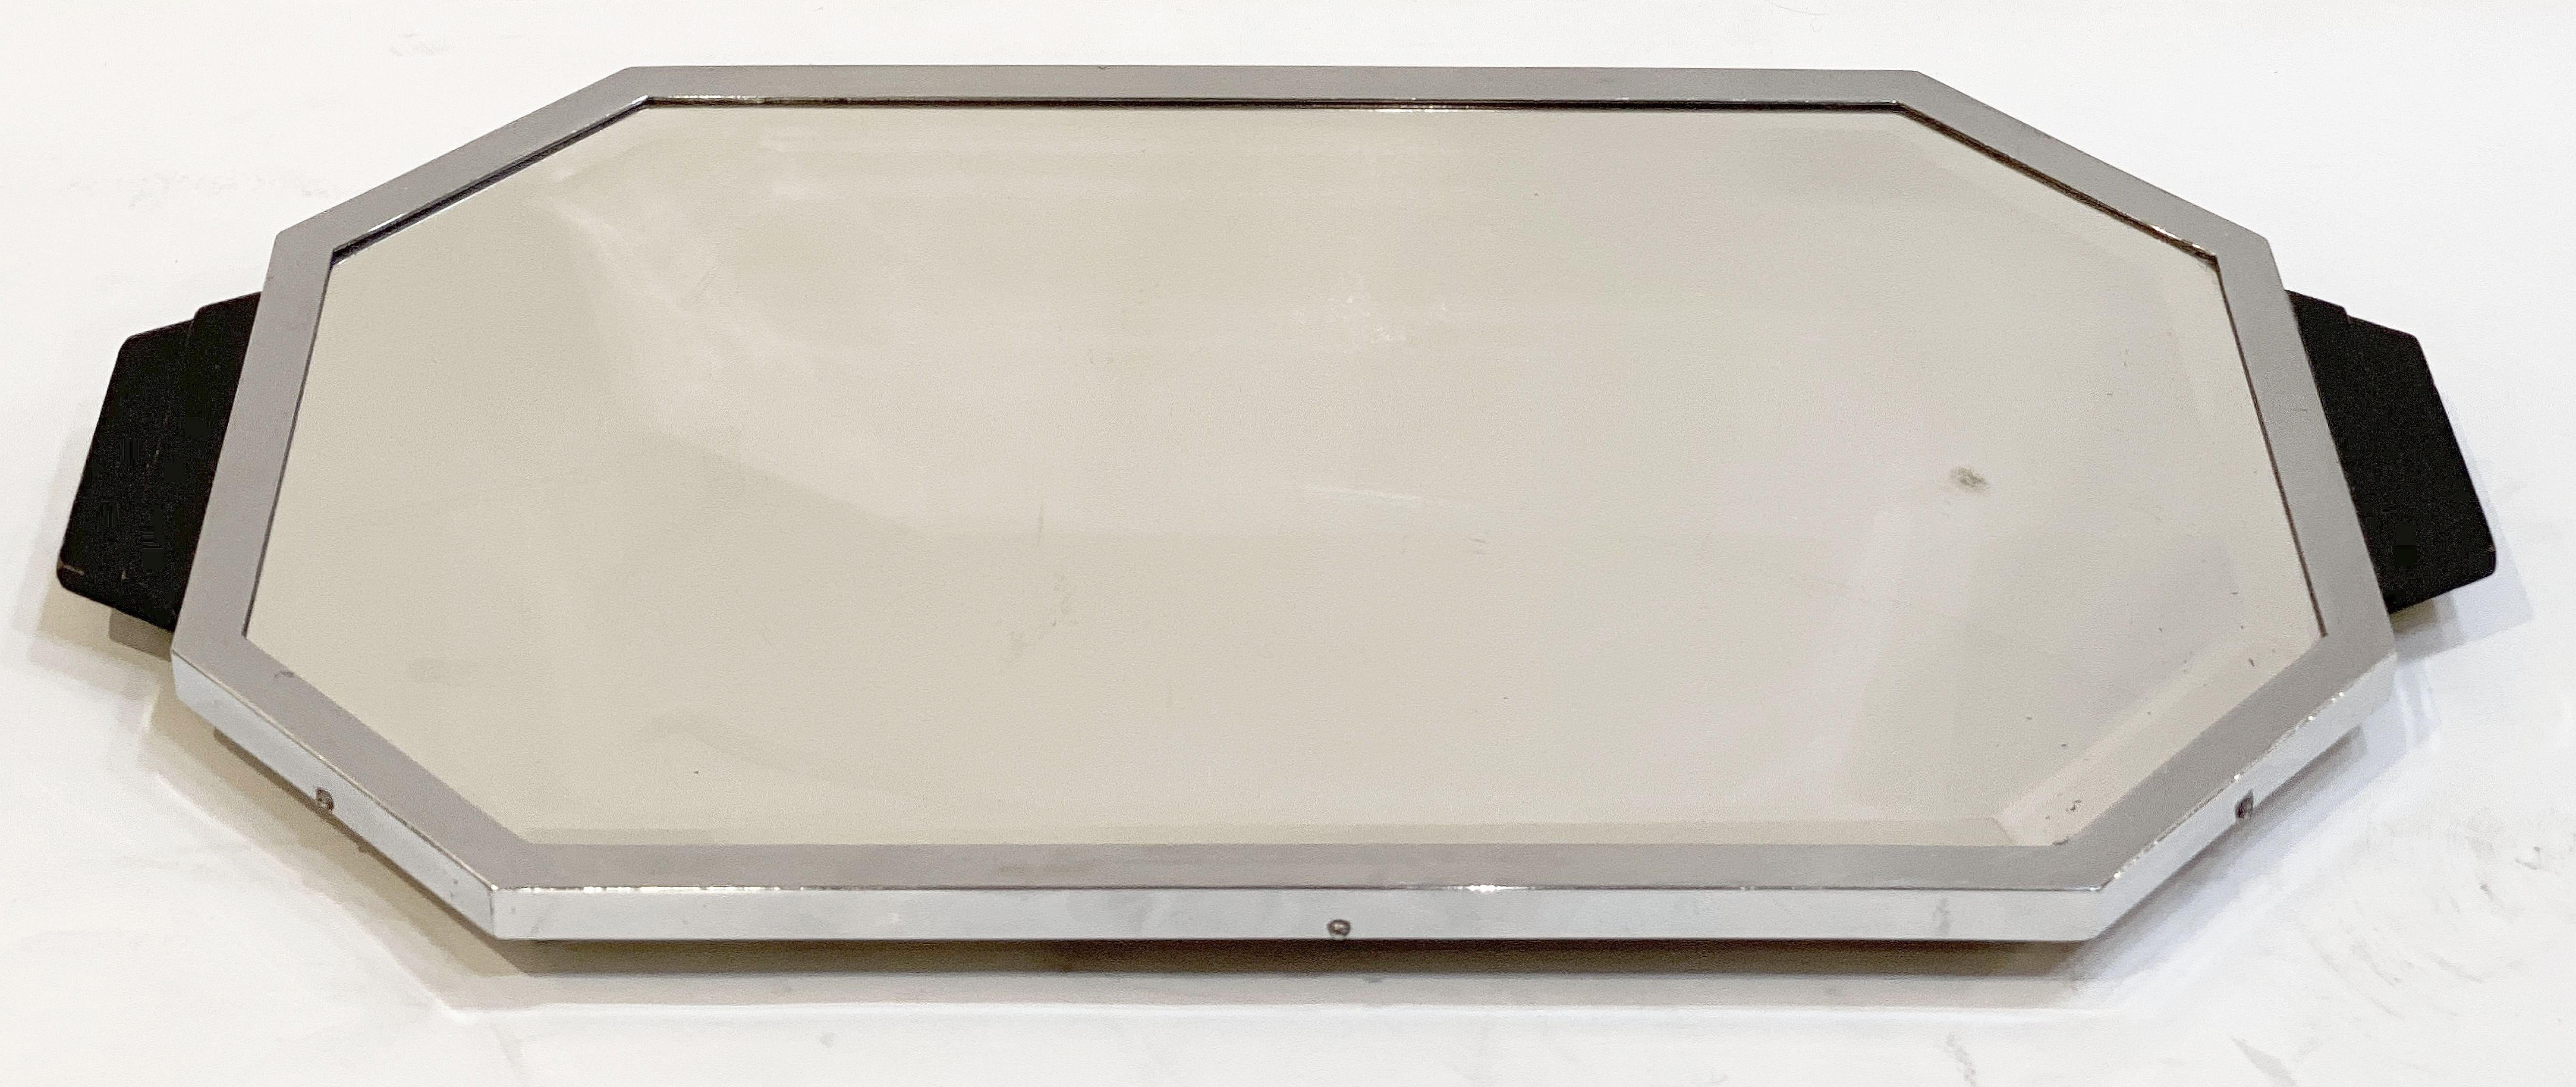 English Art Deco Era Rectangular Mirrored Tray of Chrome and Wood from England